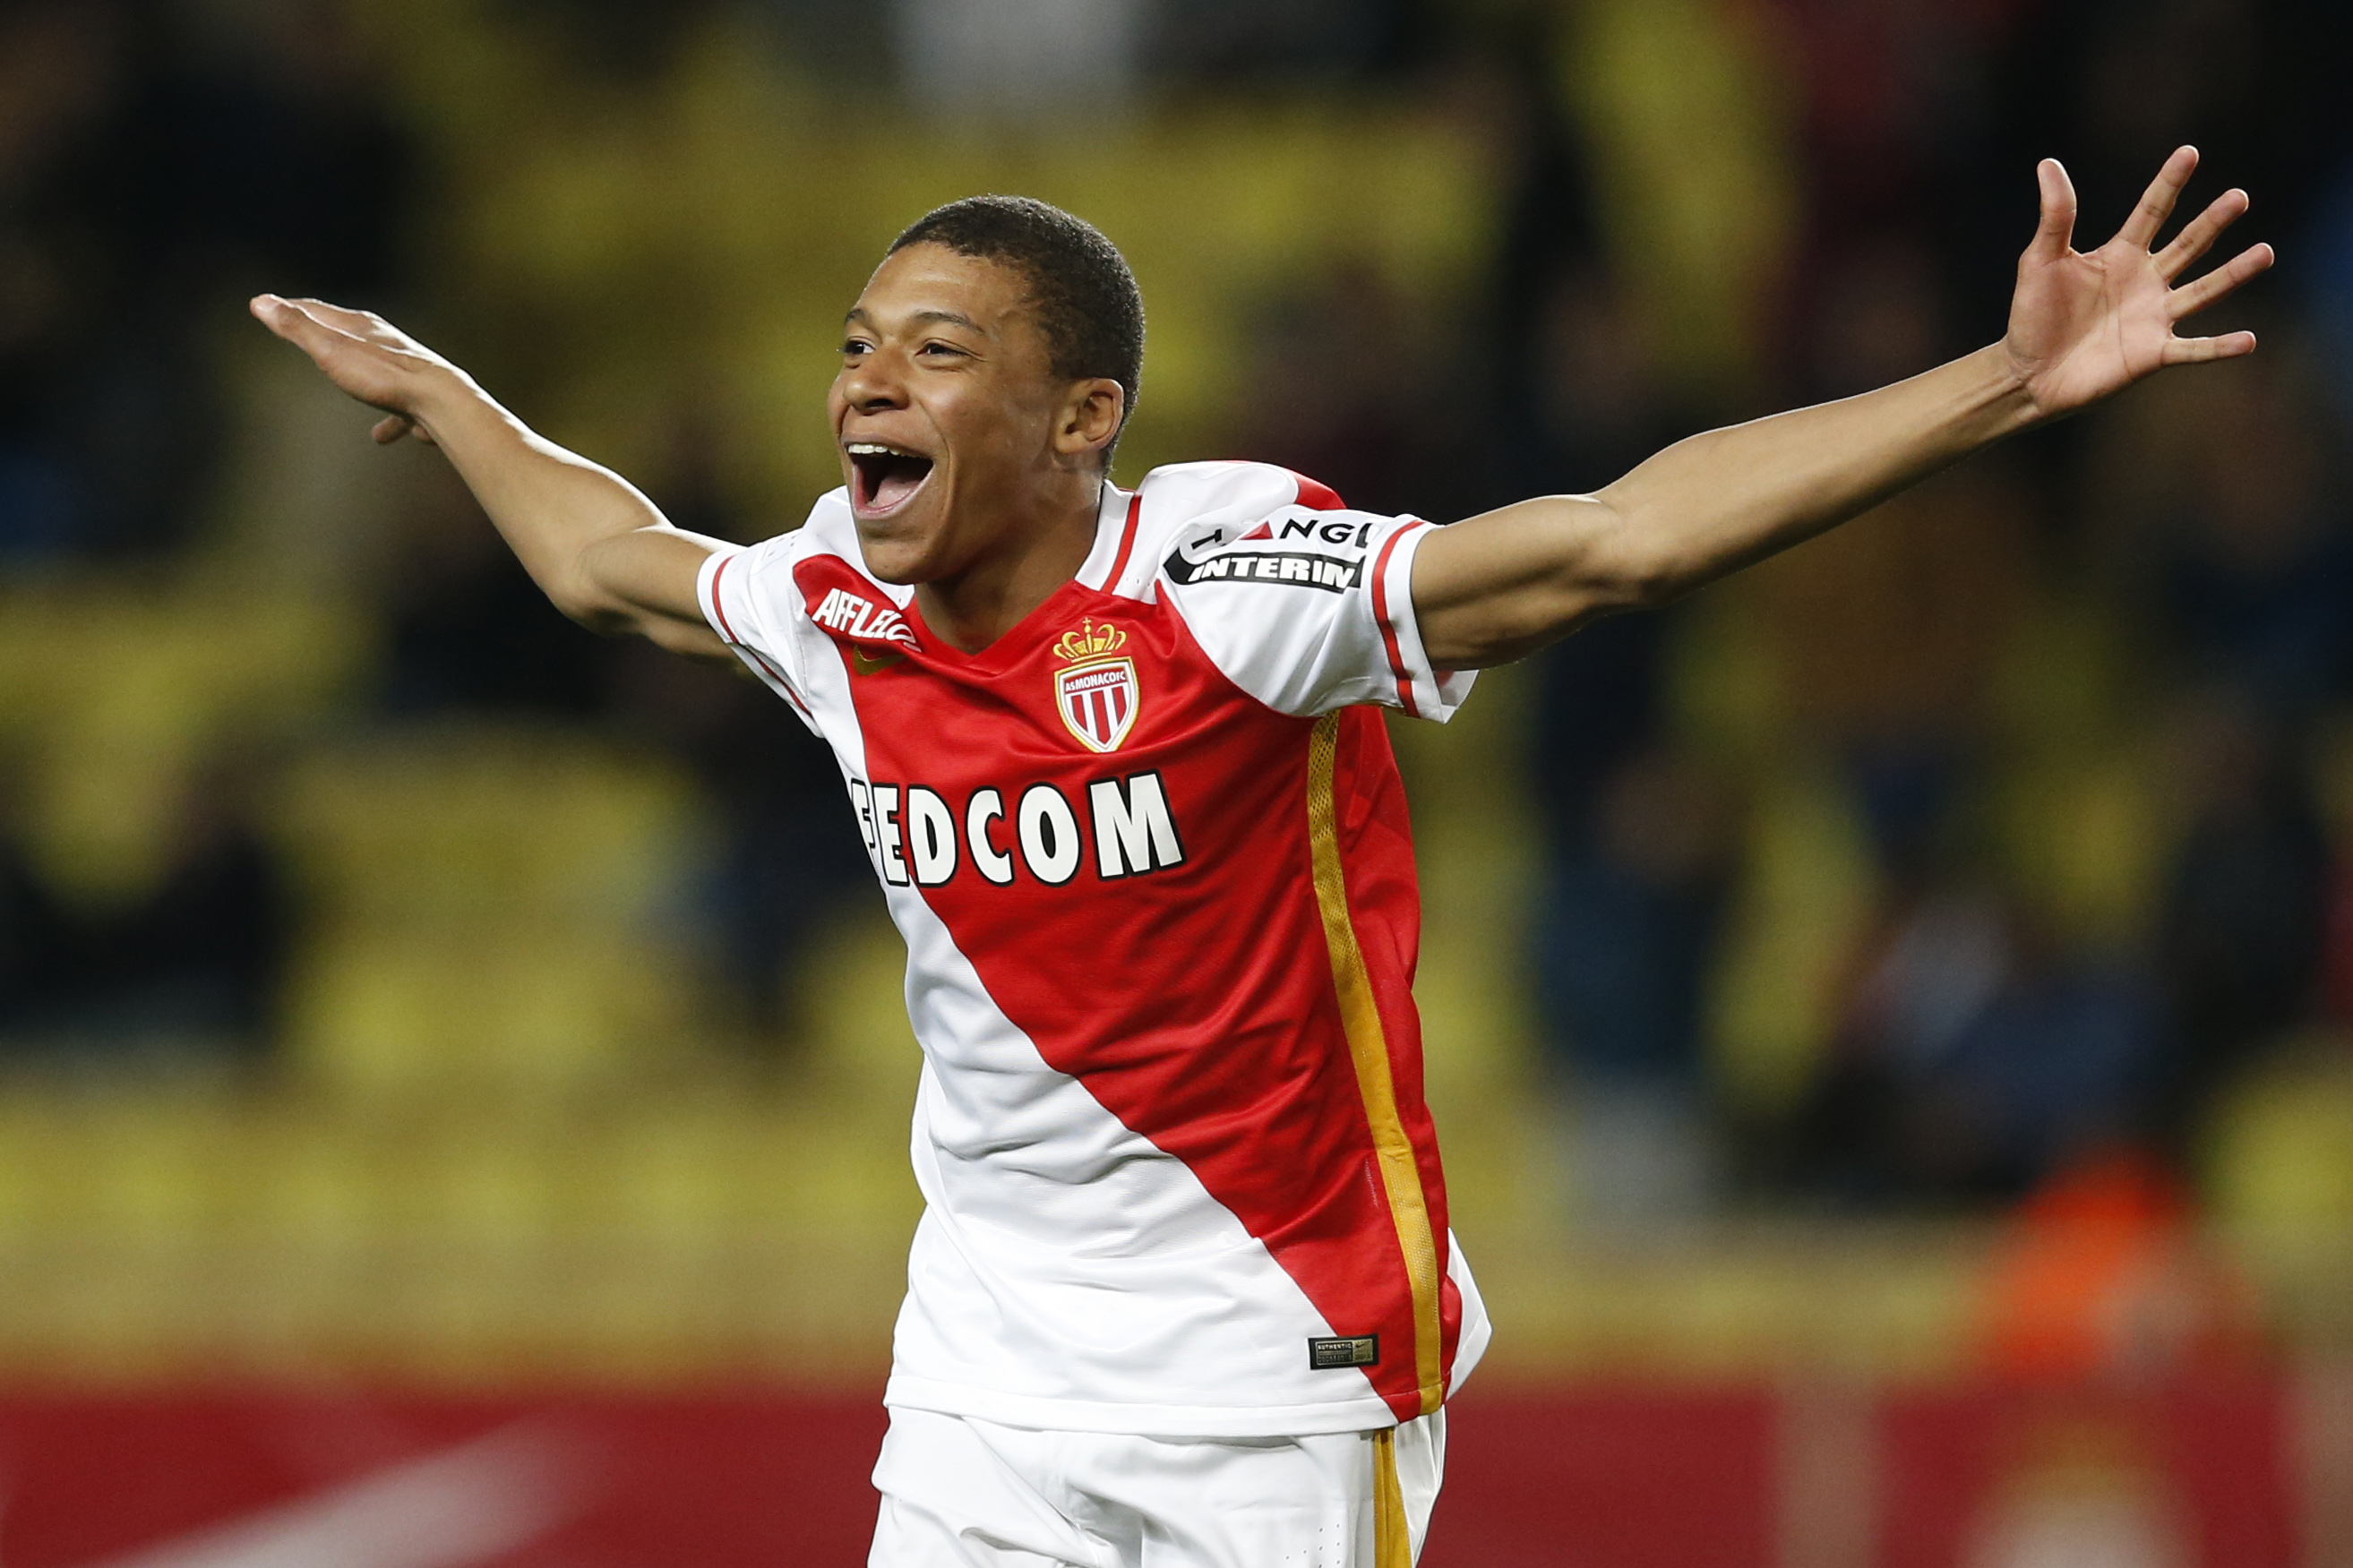 Monaco's French forward Kylian Mbappe Lottin celebrates after scoring a goal during the French L1 football match Monaco (ASM) vs Troyes (ESTAC) on February 20, 2016 at the "Louis II Stadium" in Monaco.  AFP PHOTO / VALERY HACHE / AFP / VALERY HACHE        (Photo credit should read VALERY HACHE/AFP/Getty Images)